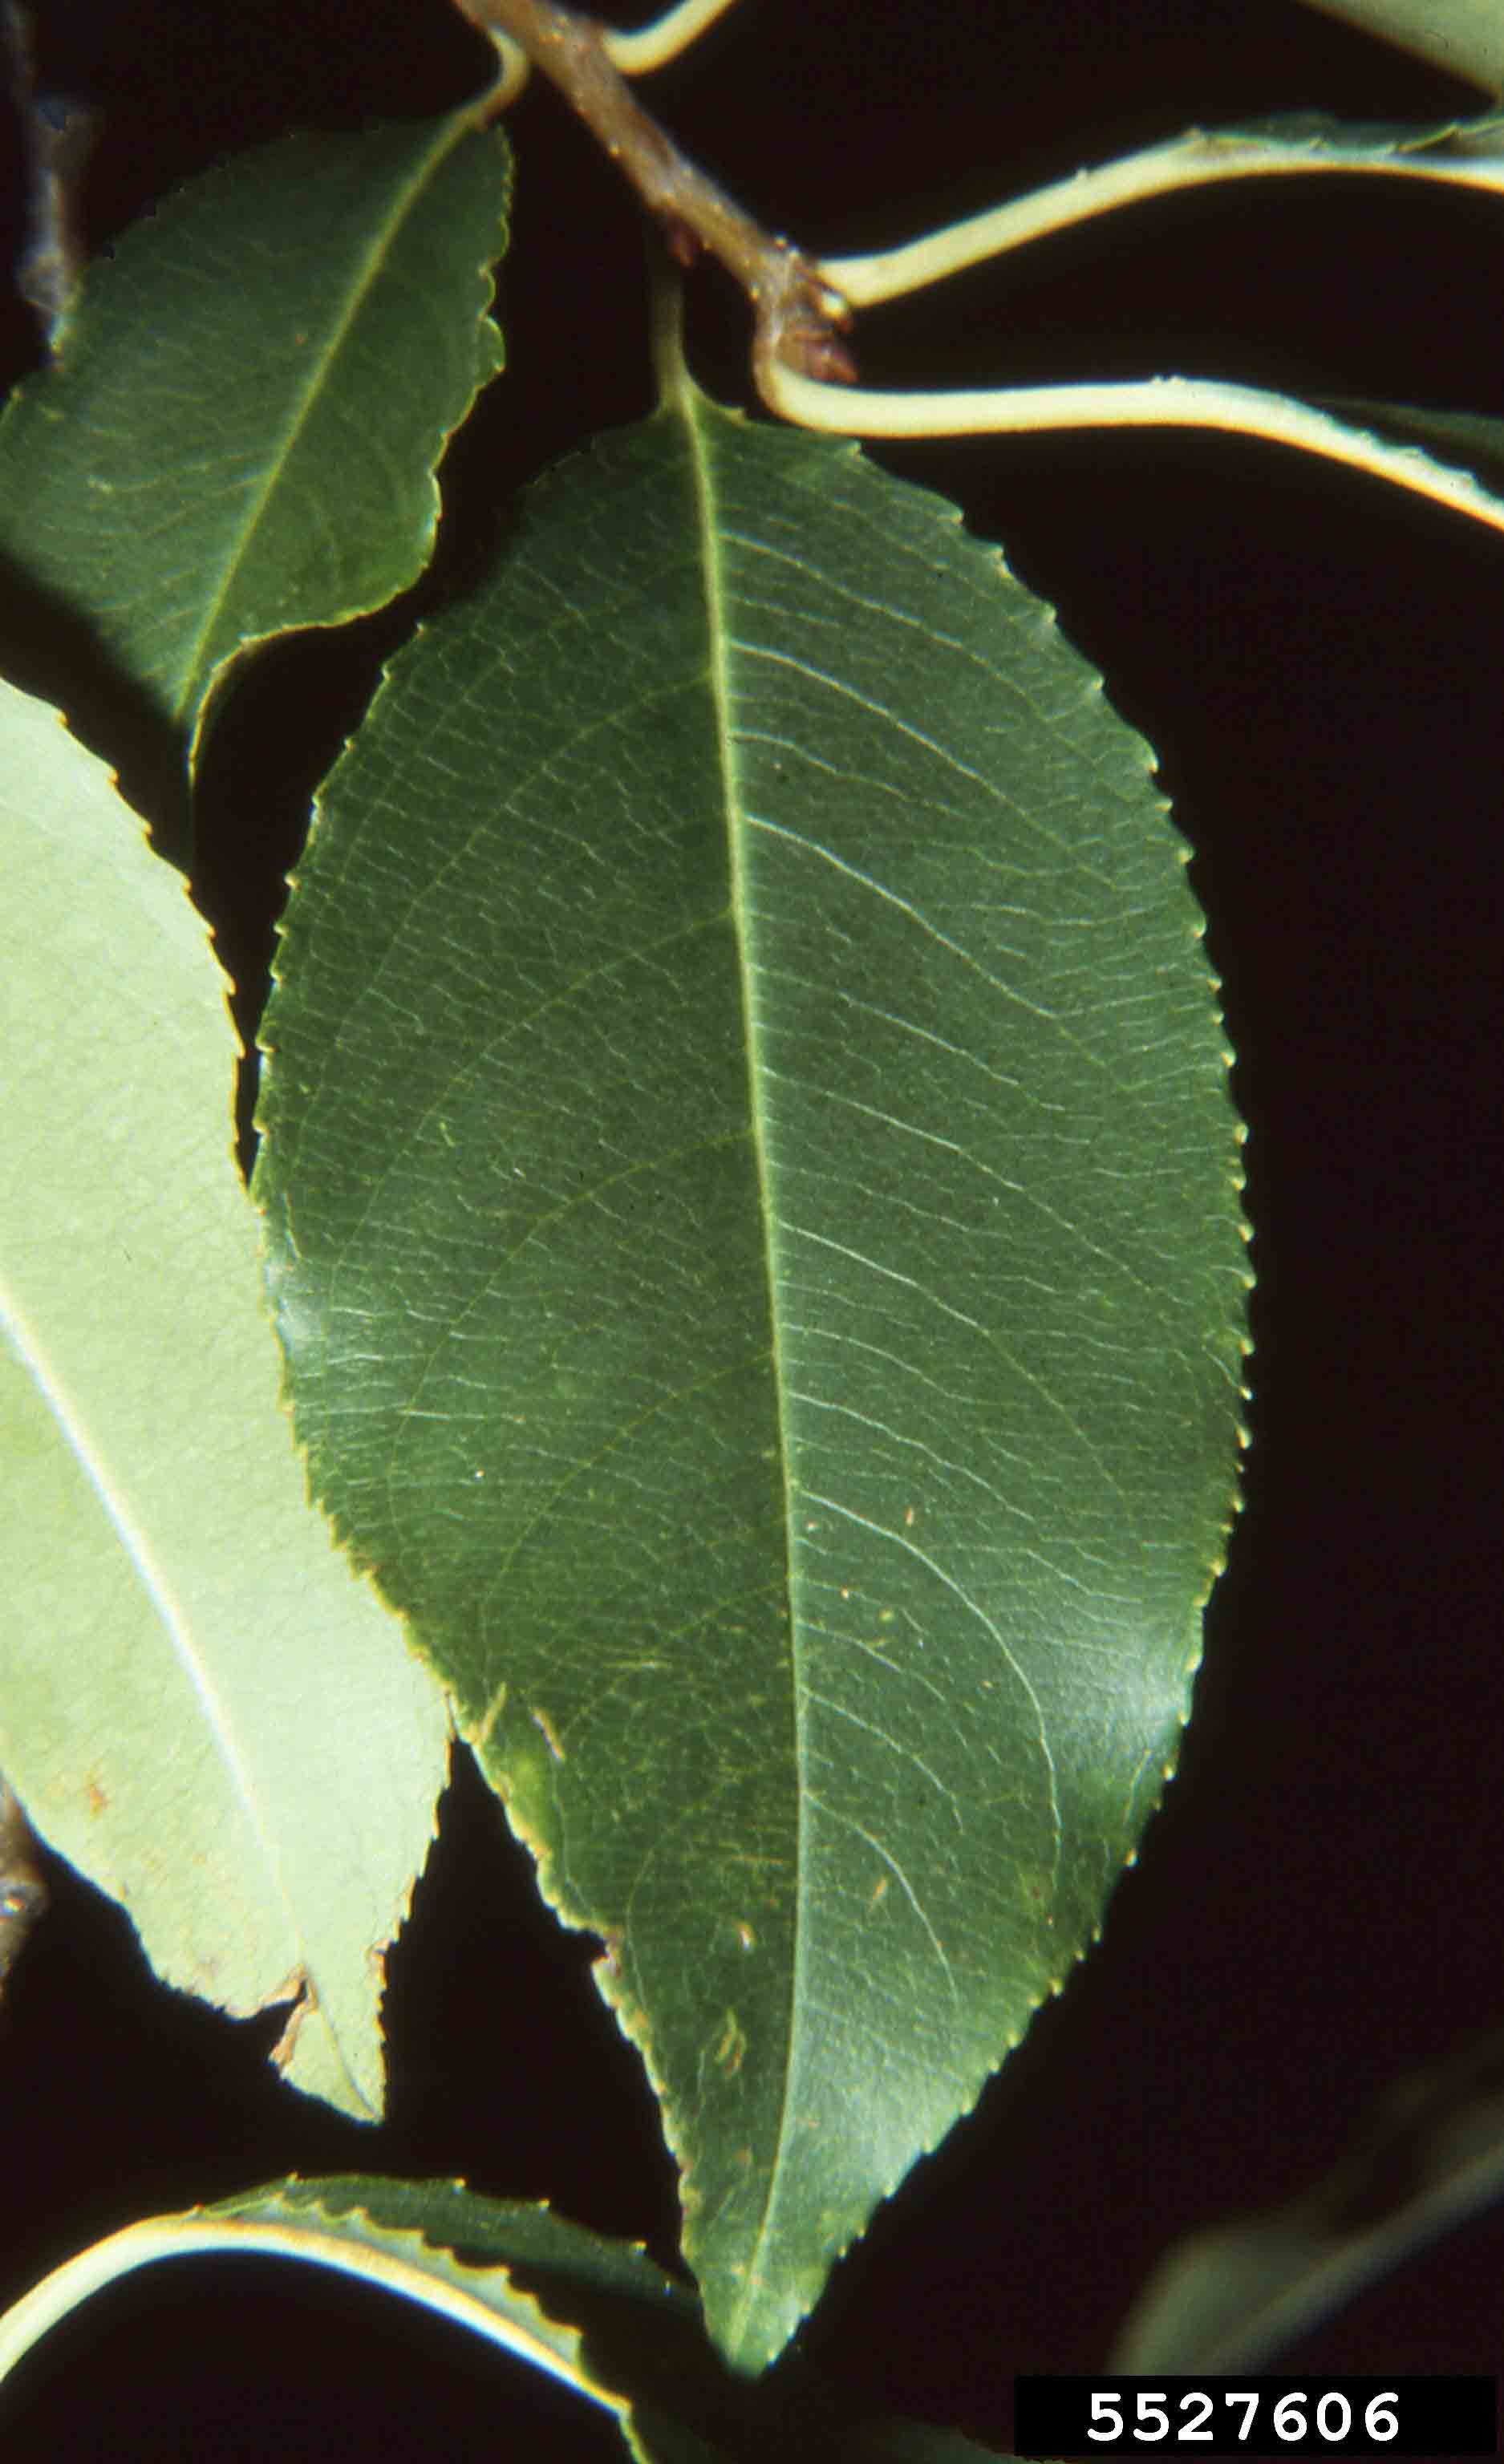 Black cherry leaf, showing finely toothed margins